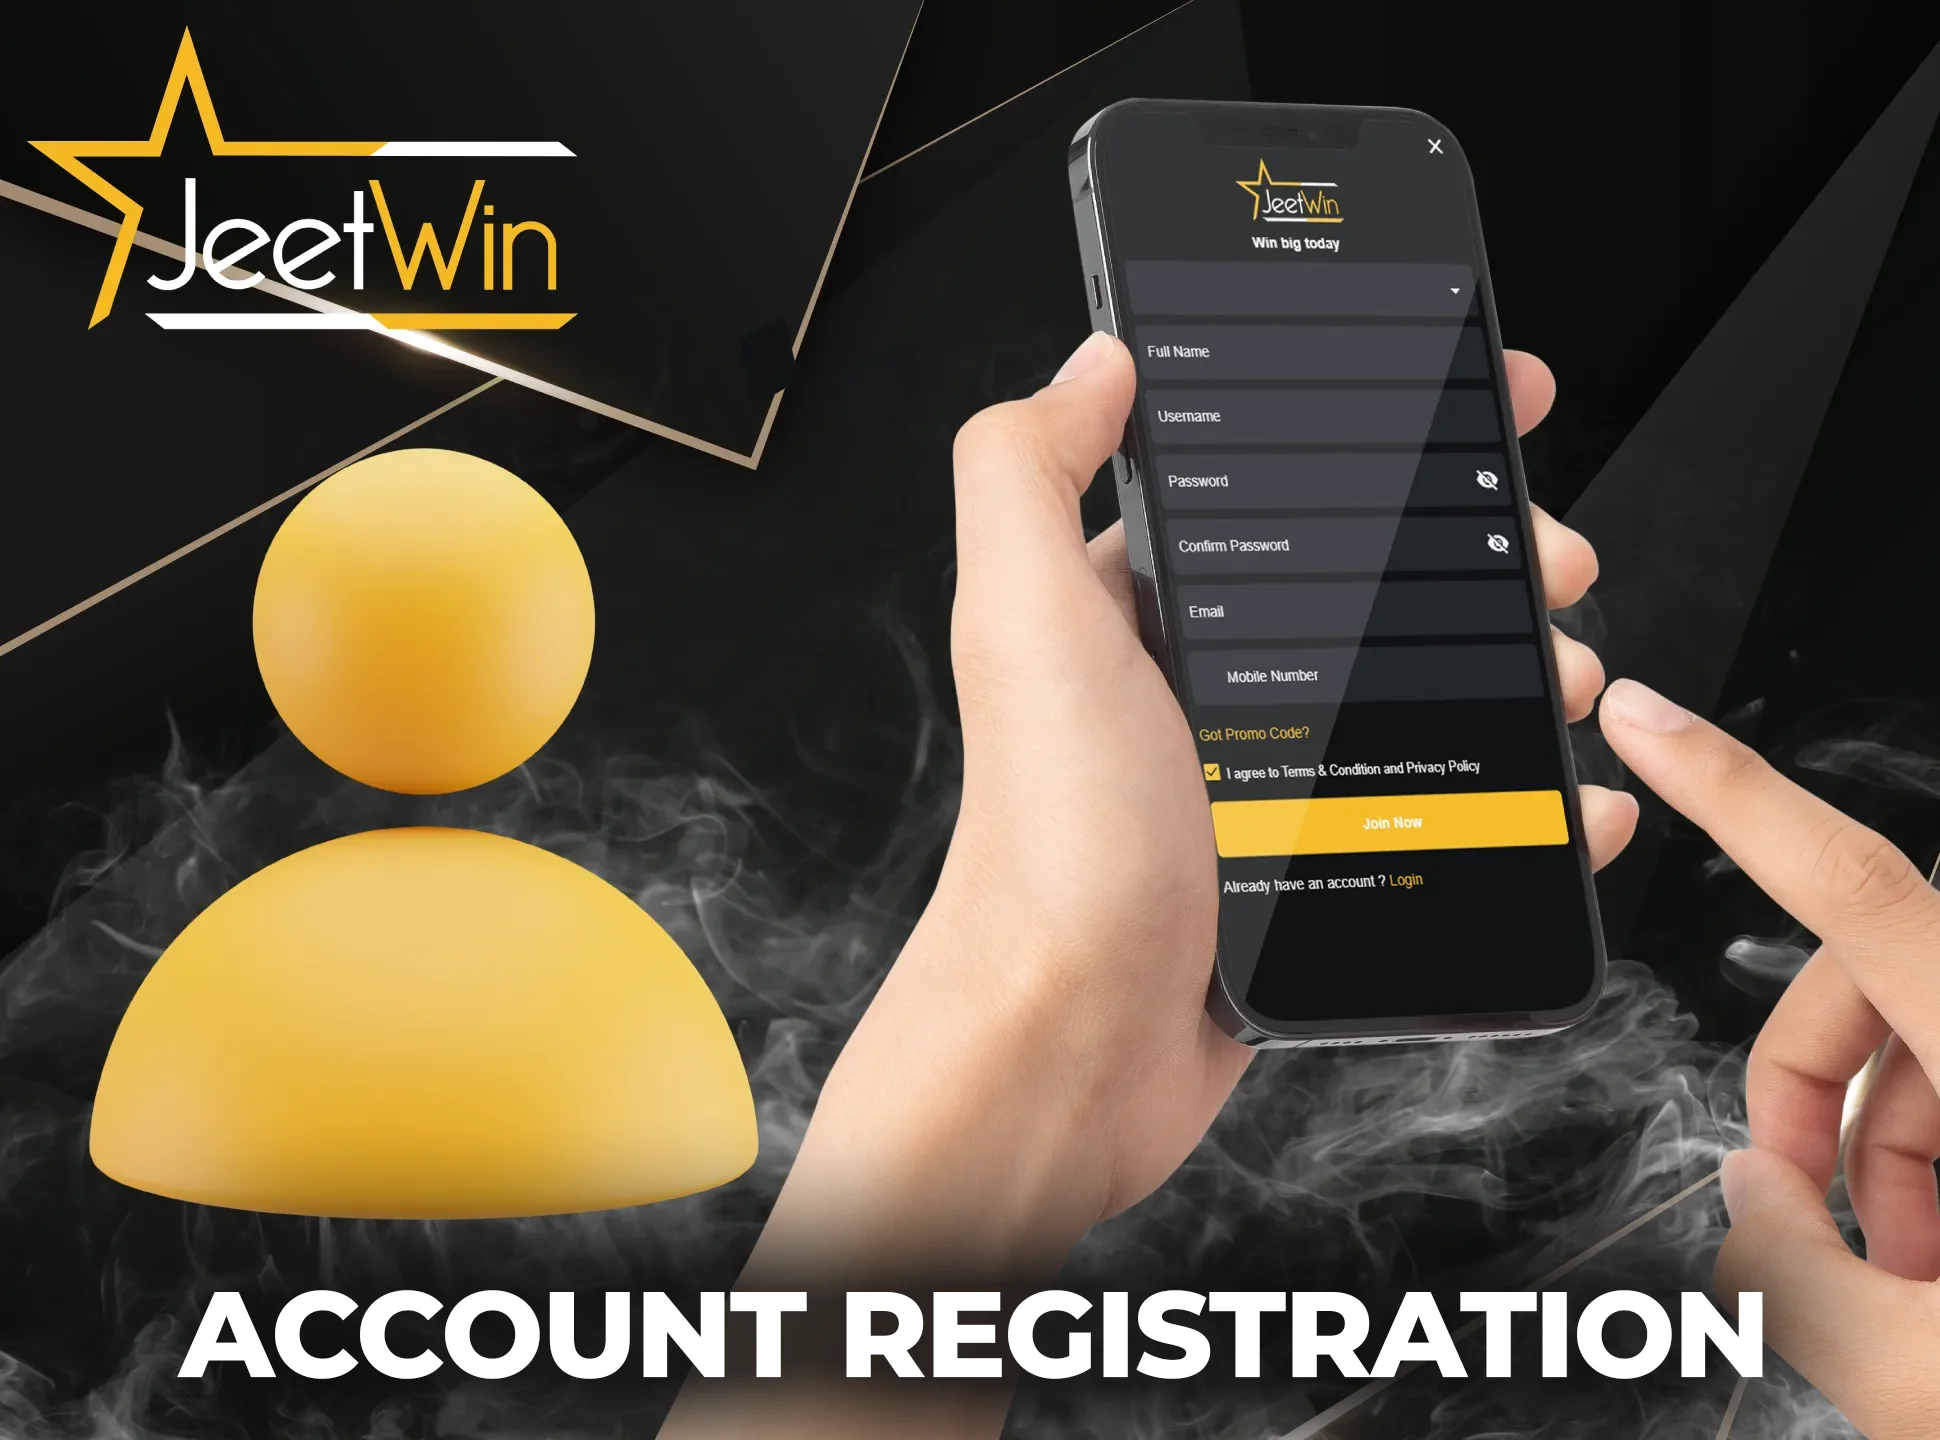 Go through the account registration process in the JeetWin app.